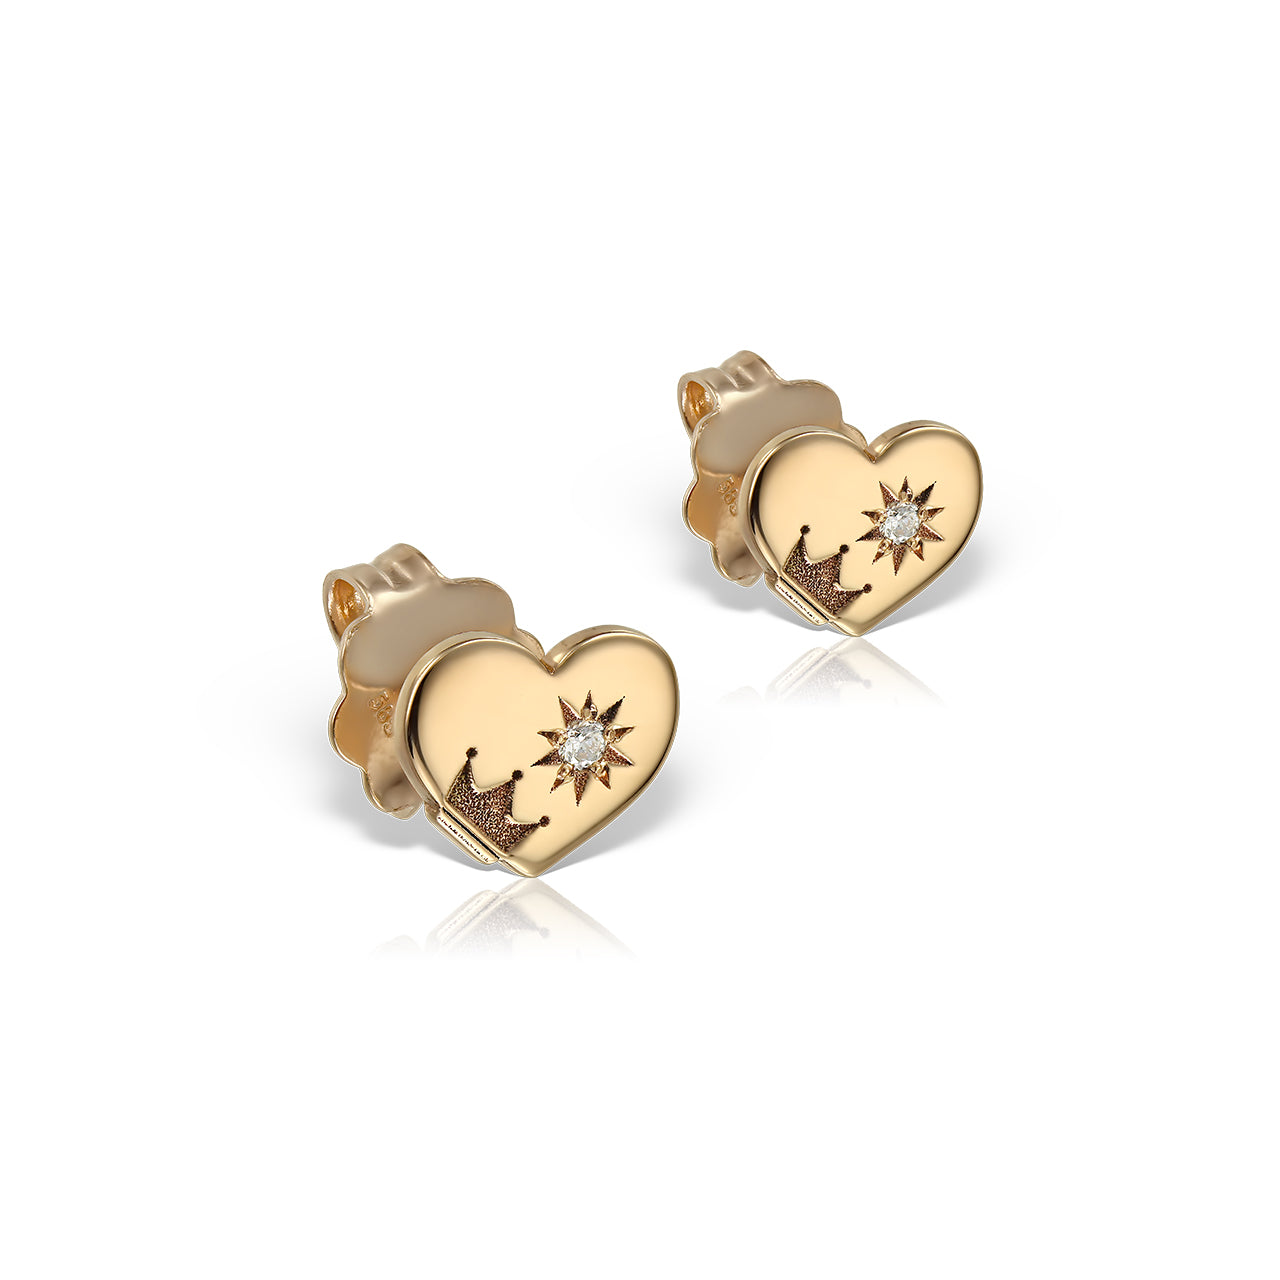 Stud earrings Hearts and Crowns with white diamonds S, in rose gold - zeaetsia